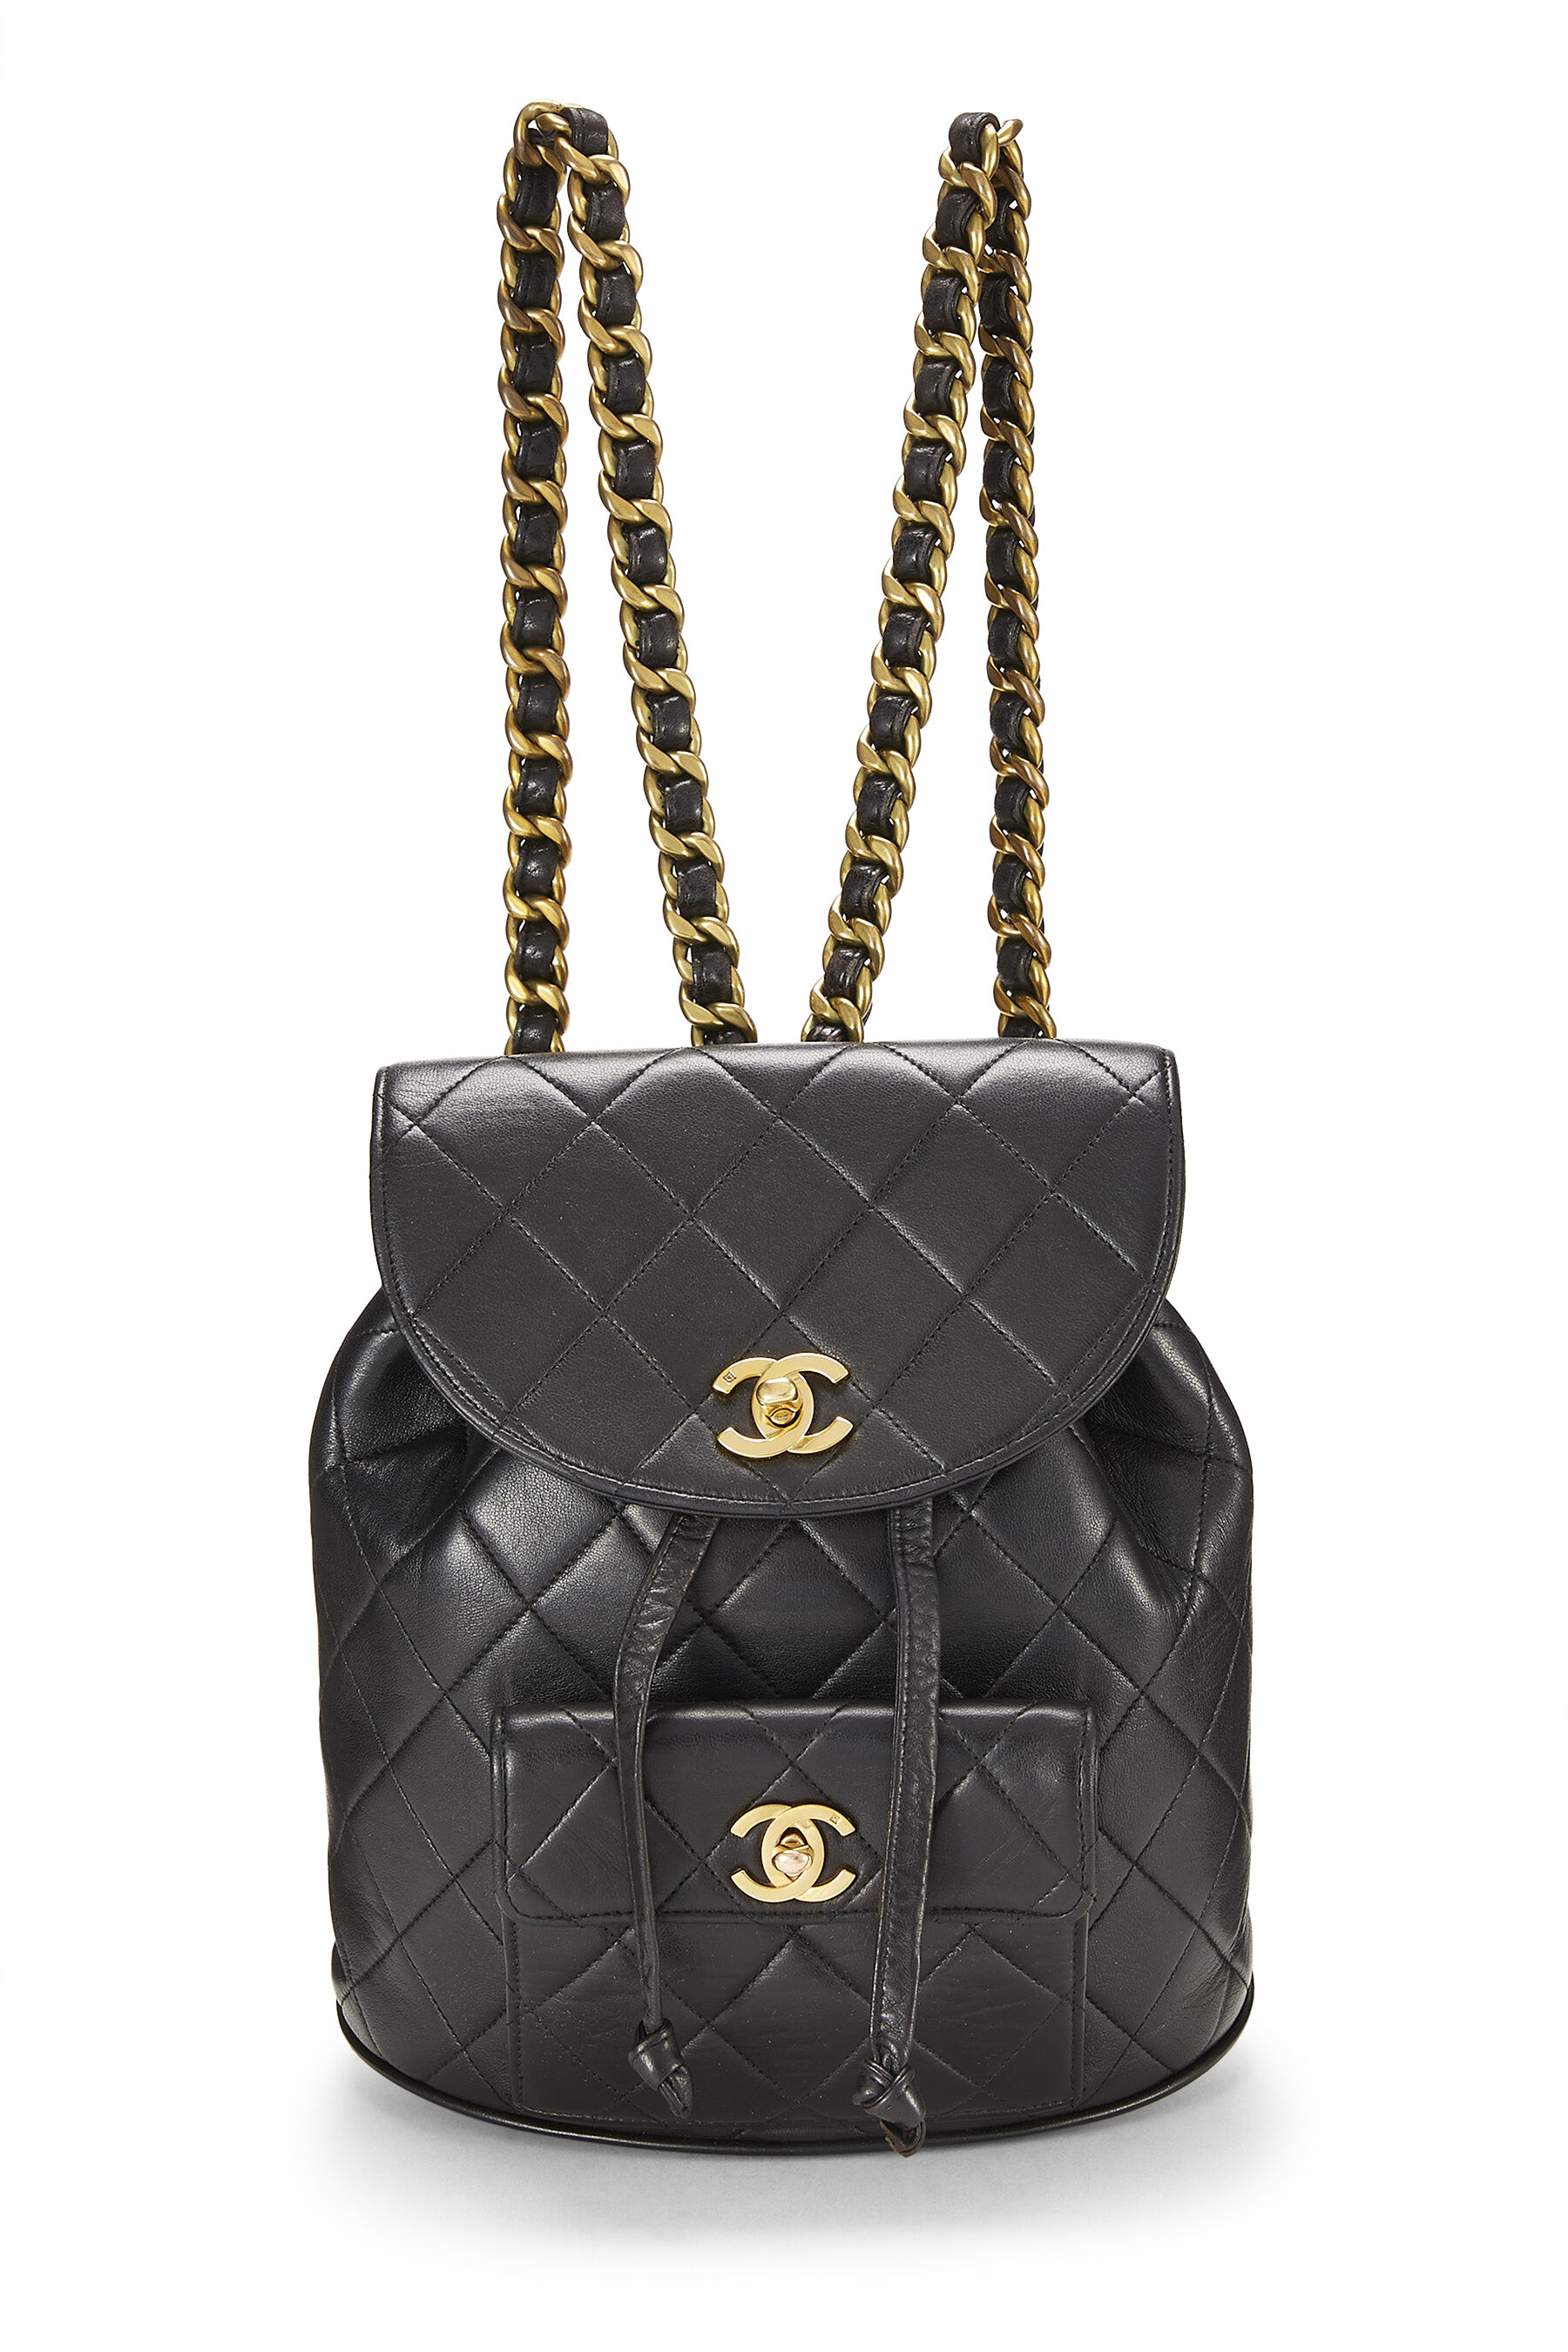 Chanel - Black Quilted Lambskin 'CC' Classic Backpack Medium